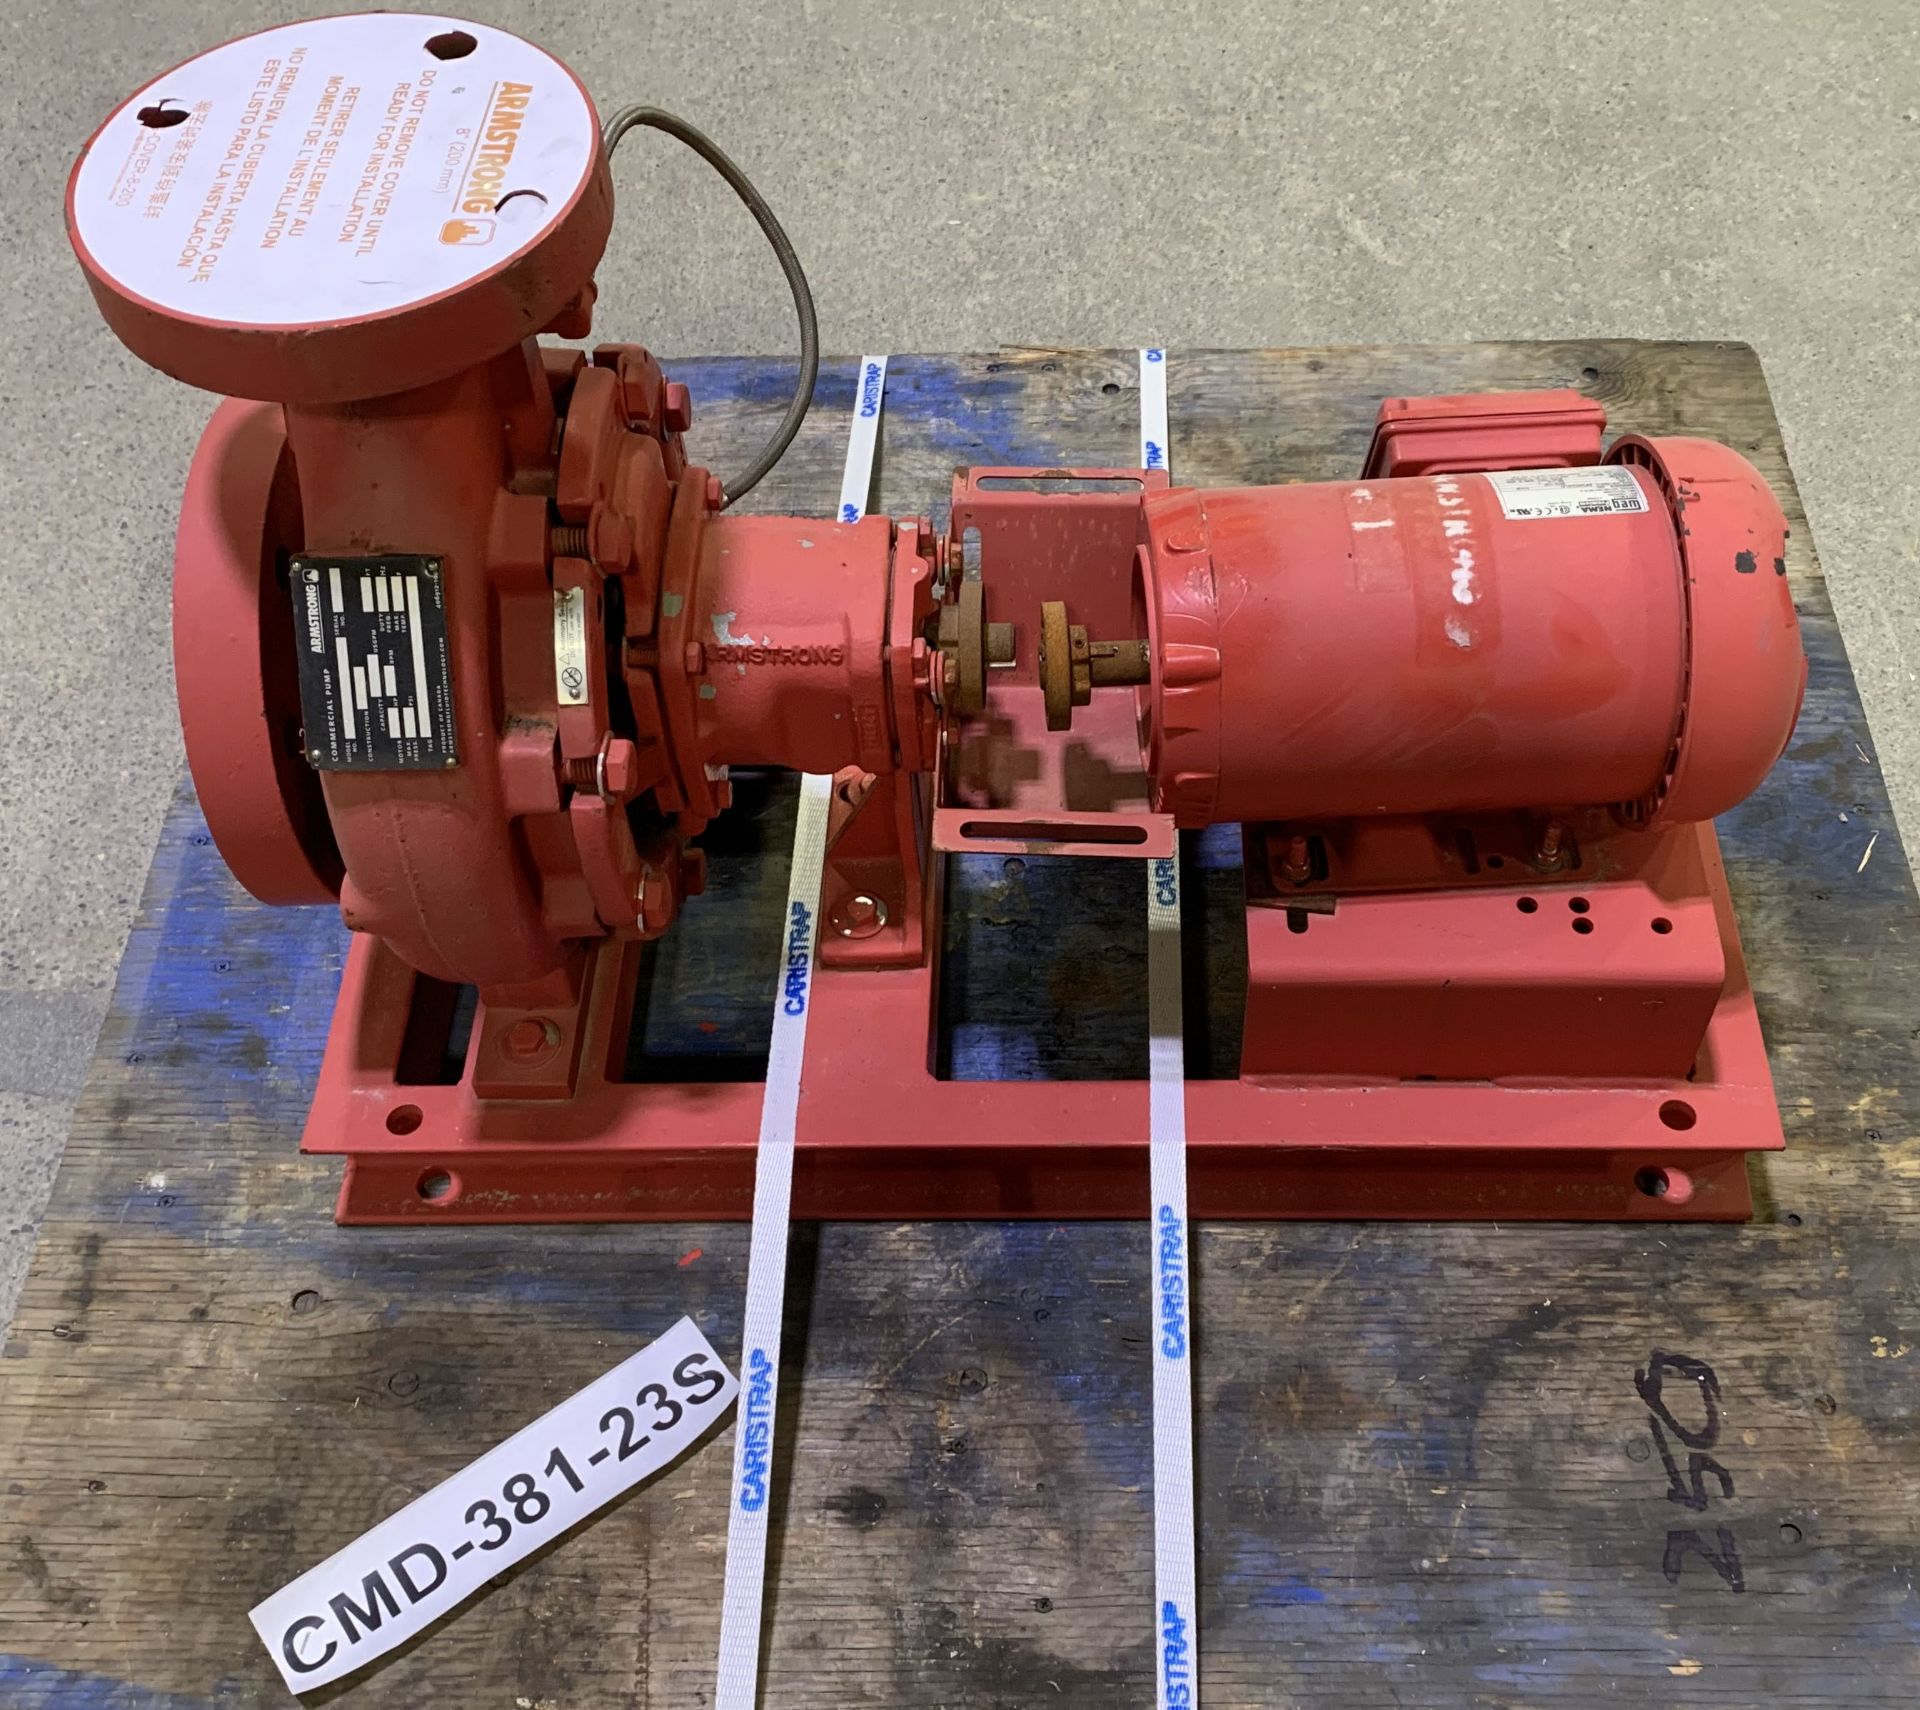 LOT/ CANADA 4X6 SFN PUMP, ANALYZER SAMPLE PUMP, SUBMERSIBLE PUMP CORES, 14" MOTOR STAND & DUCHTING - Image 10 of 23